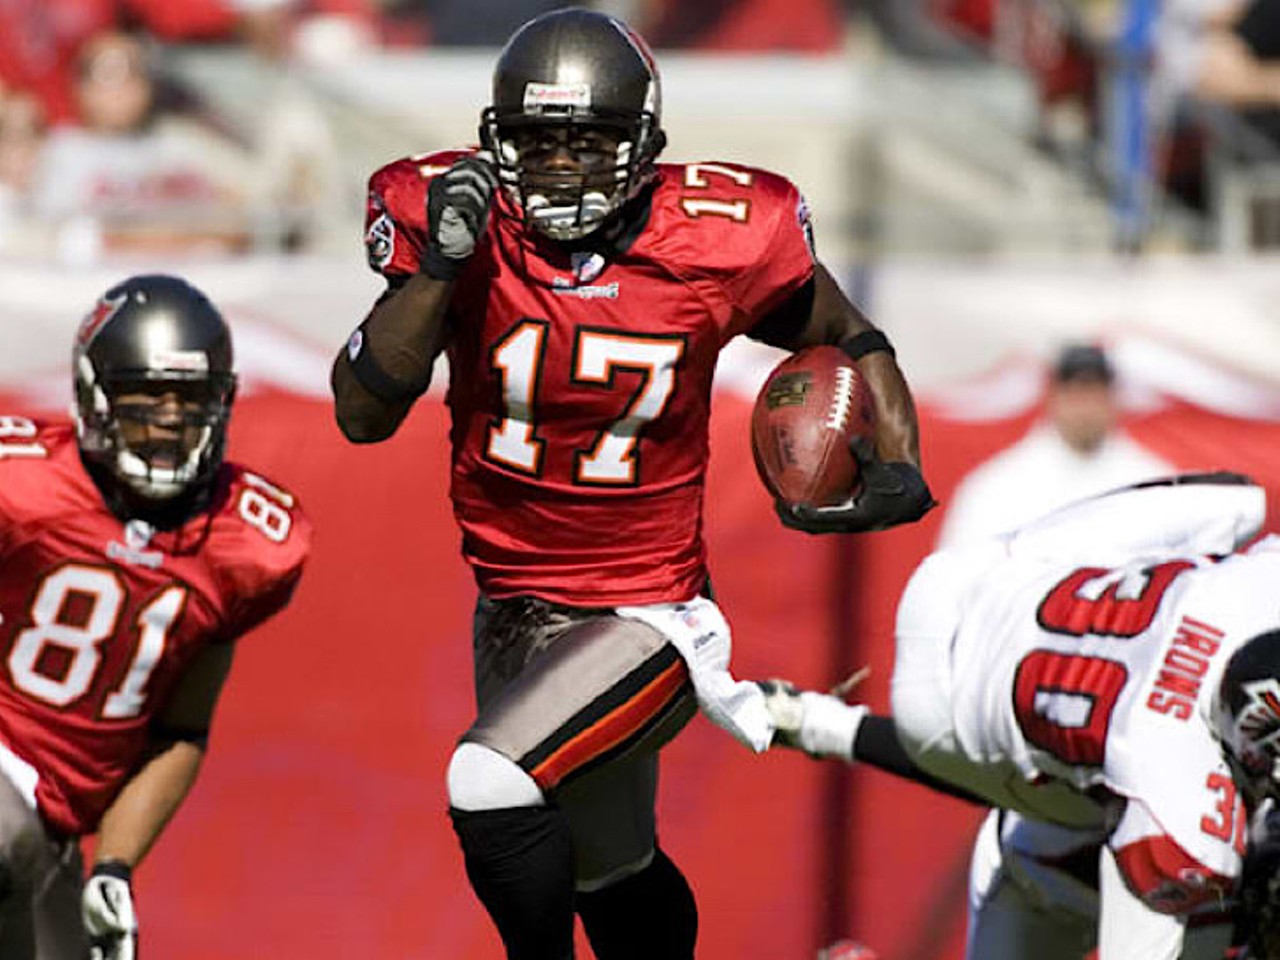 It took the Tampa Bay Buccaneers 32 seasons to return a kickoff for a touchdown 
After 32 years, it had to happen eventually, right? Well, in 2007 it did. Micheal Spurlock took one to the house for 90 yards from a kick by Falcons kicker Morten Anderson (holy throwback). The first punt return for a TD took place 13 years previously, which was taken back by Vernon Turner for 80 yards. 
Photo via buccaneers.com